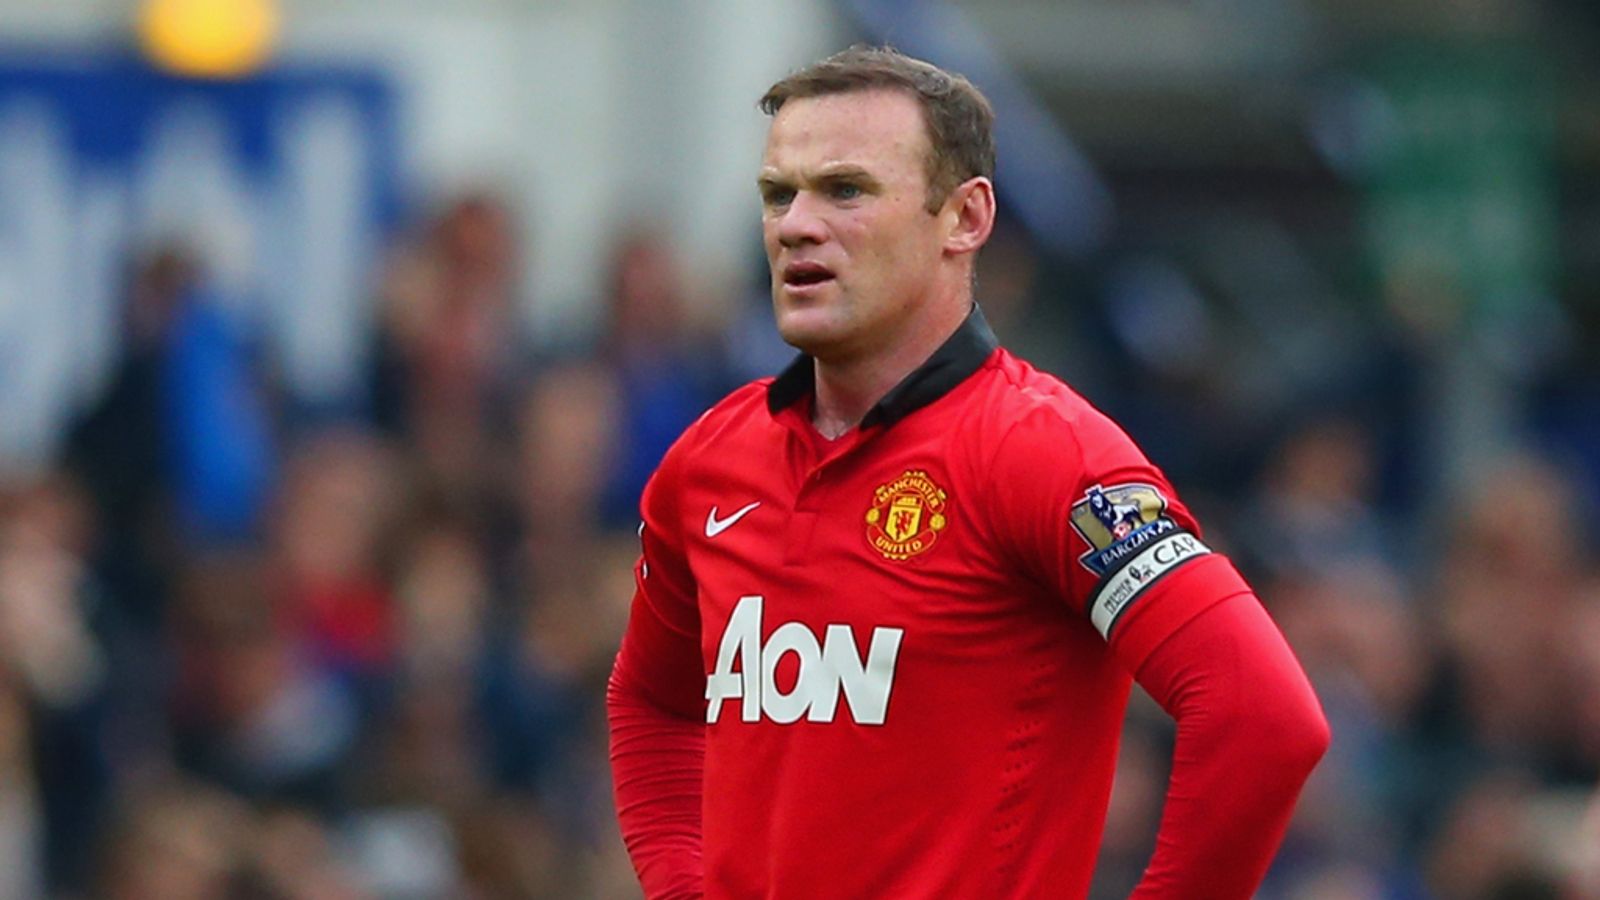 Premier League: Wayne Rooney set to miss Manchester United's game with